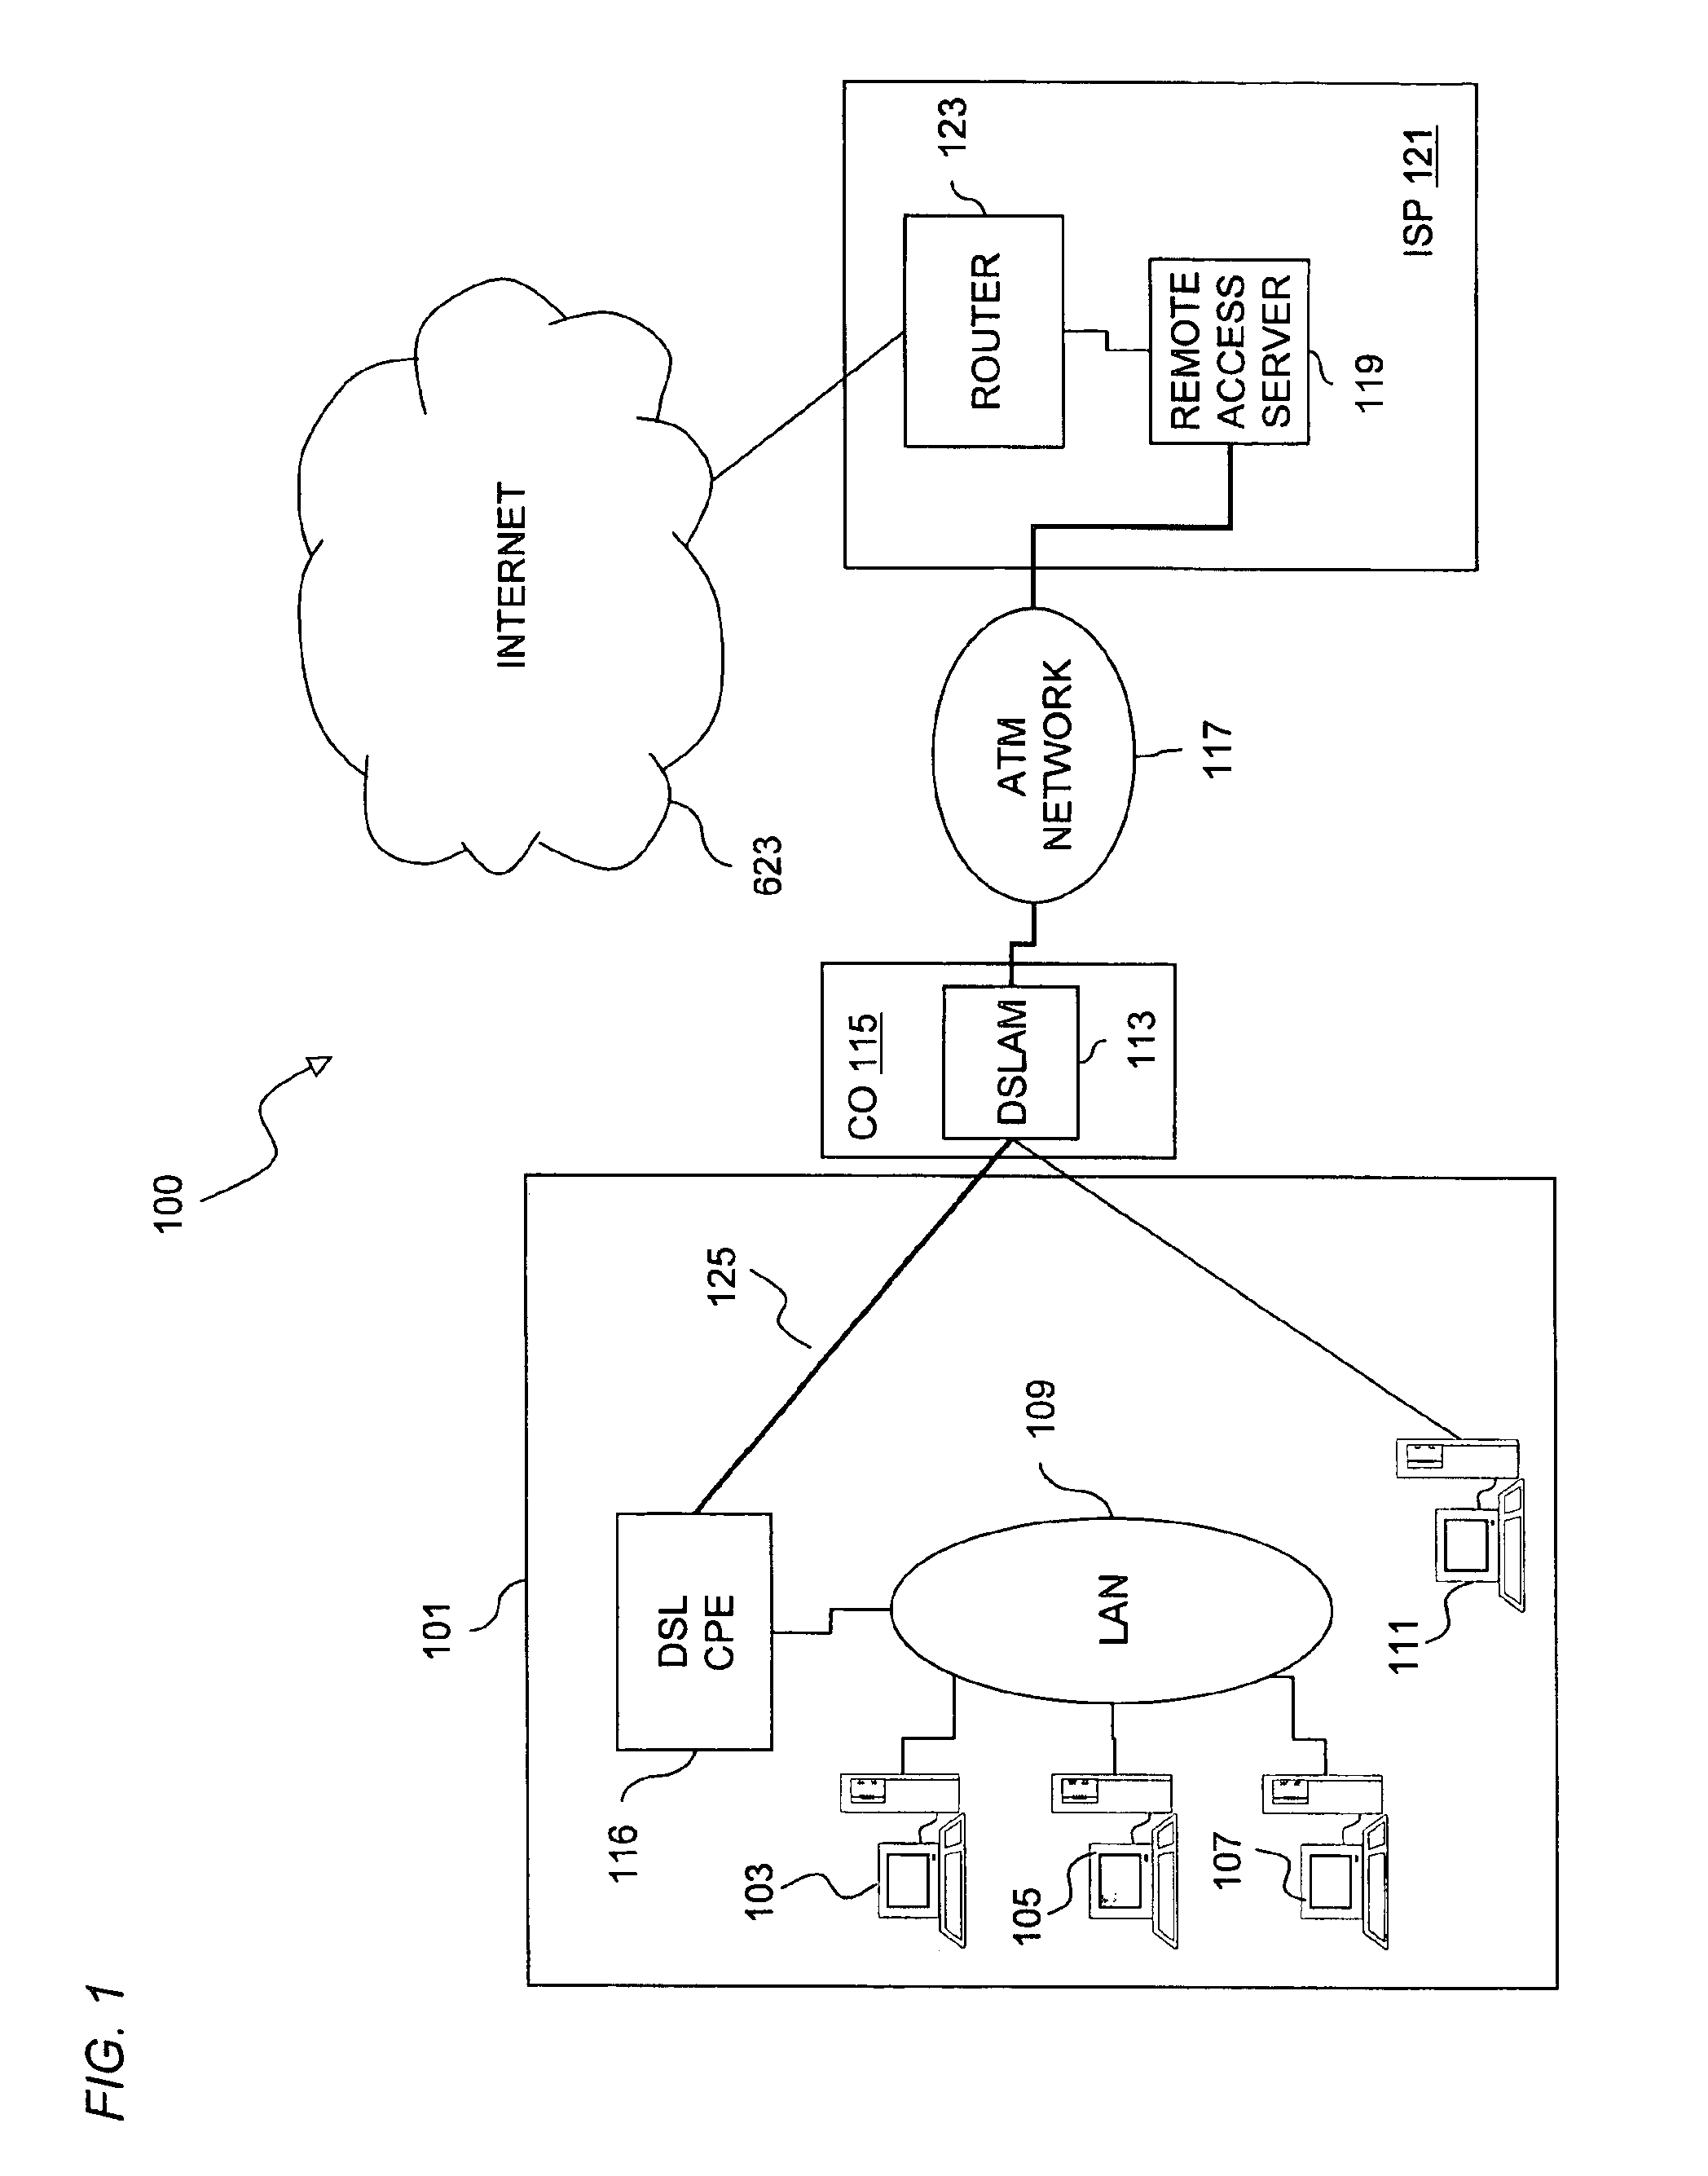 Method and system of providing multi-user access to a packet switched network